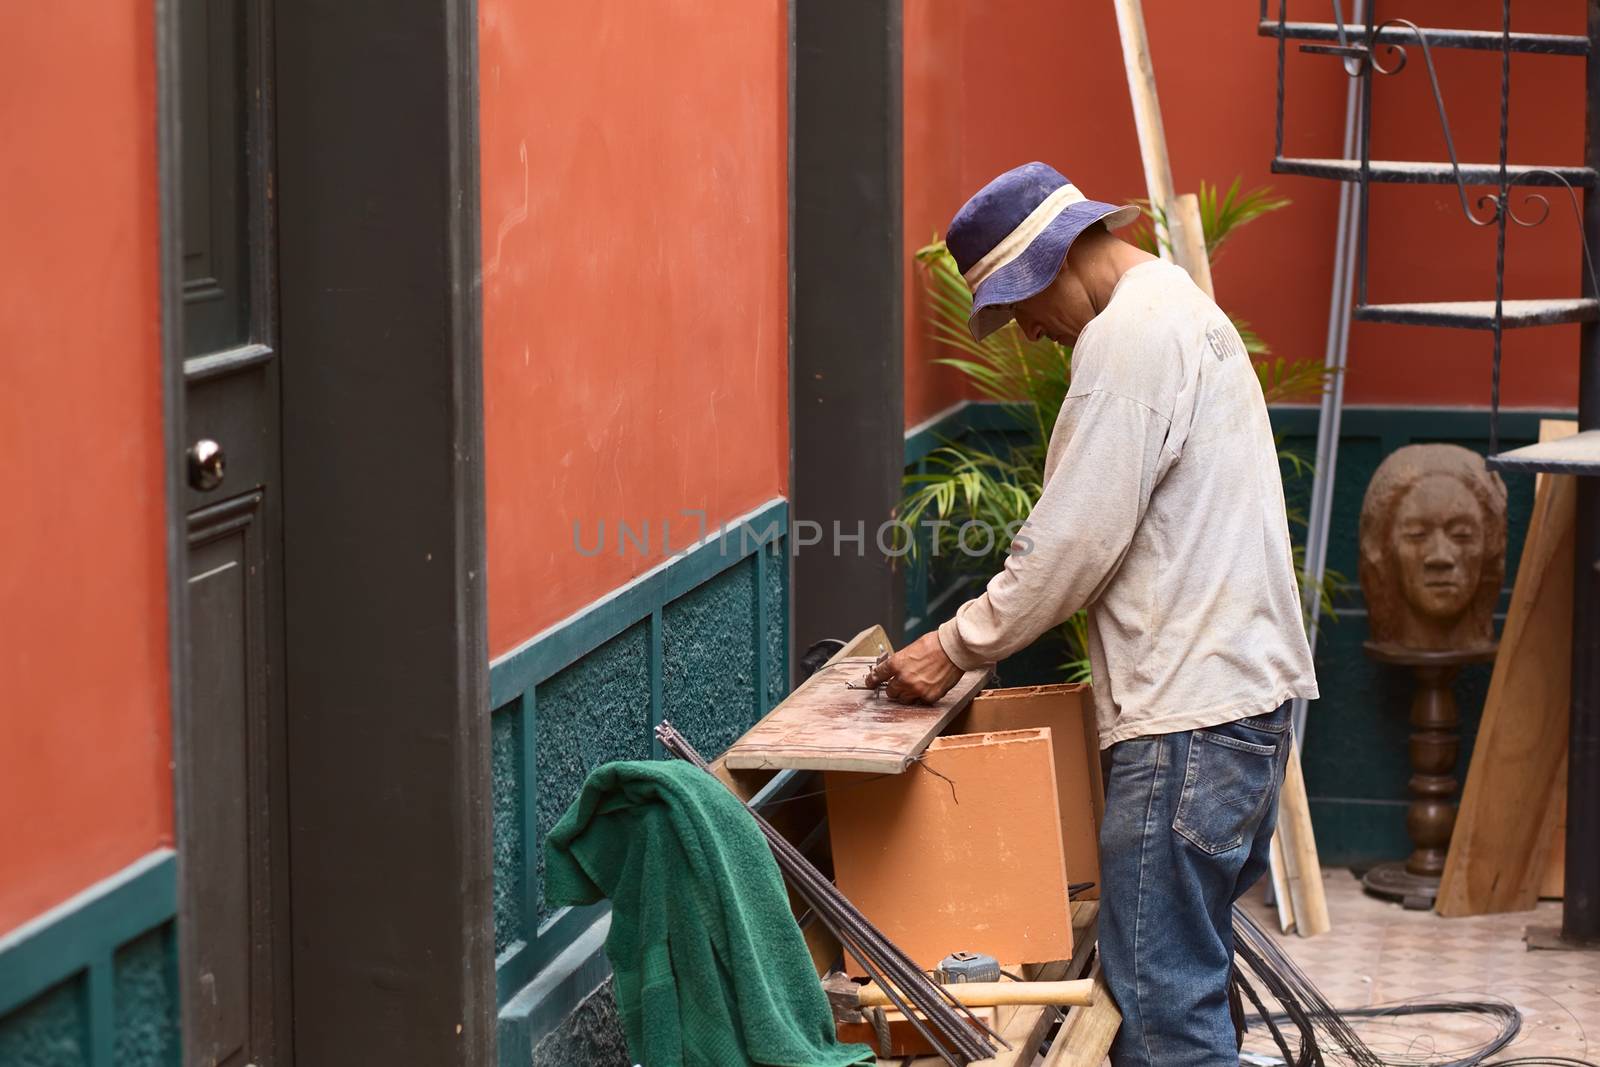 Construction Worker in Lima, Peru by sven